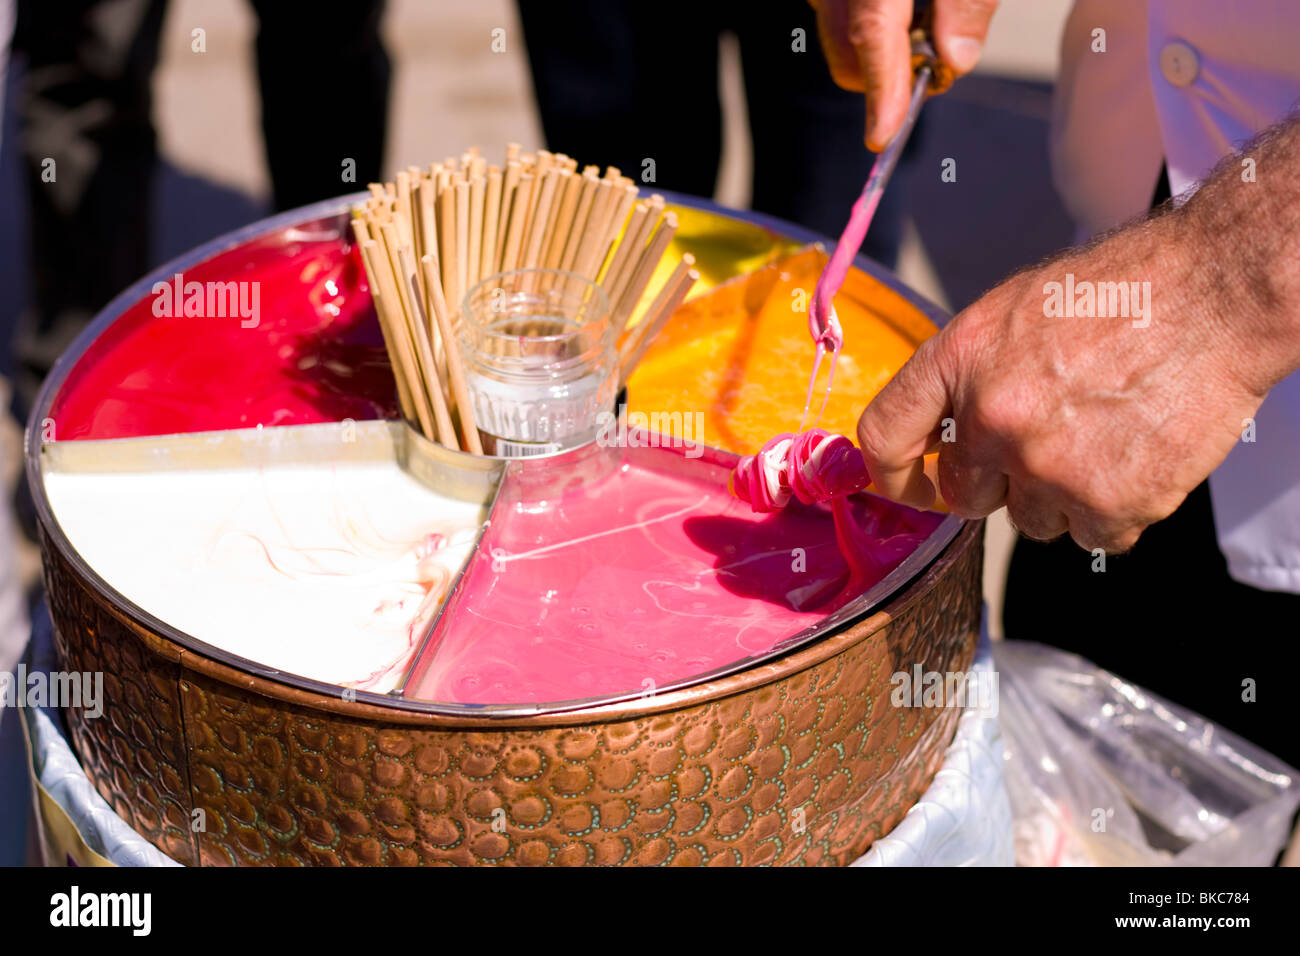 Turkish sweet being prepared on the street in Istanbul Stock Photo